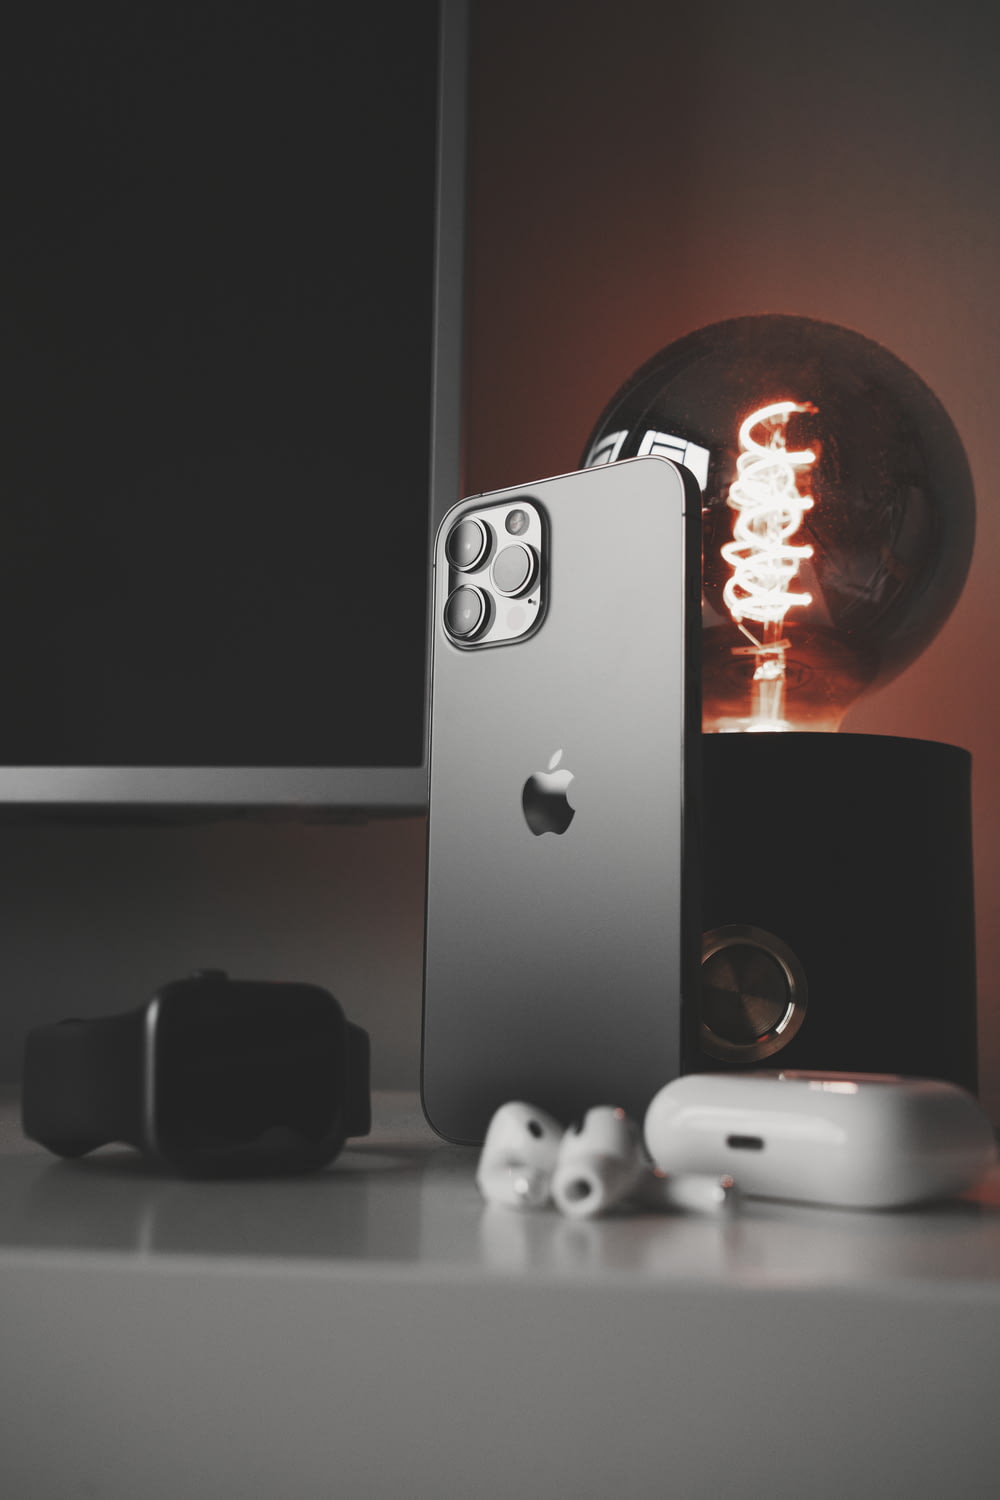 silver iphone 6 beside black and white portable speaker